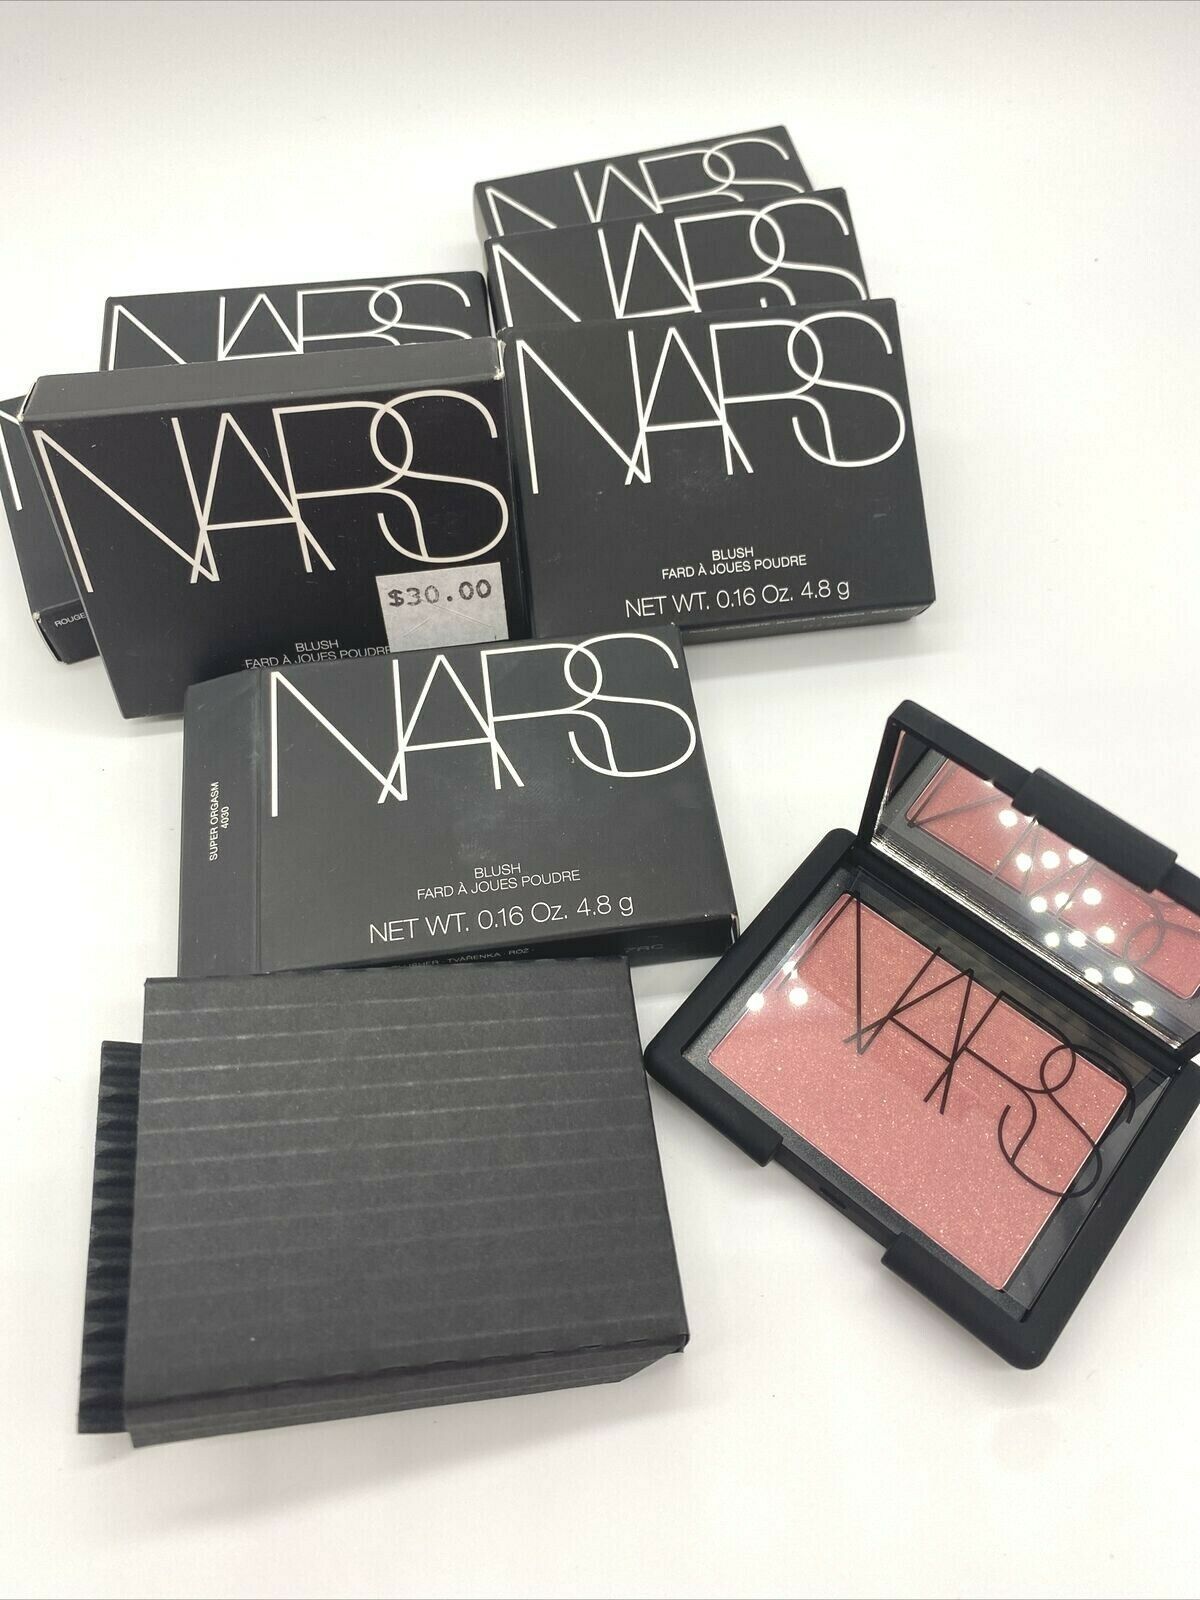 Nars Blush Brand New in Box only opened for pics Never Swatched